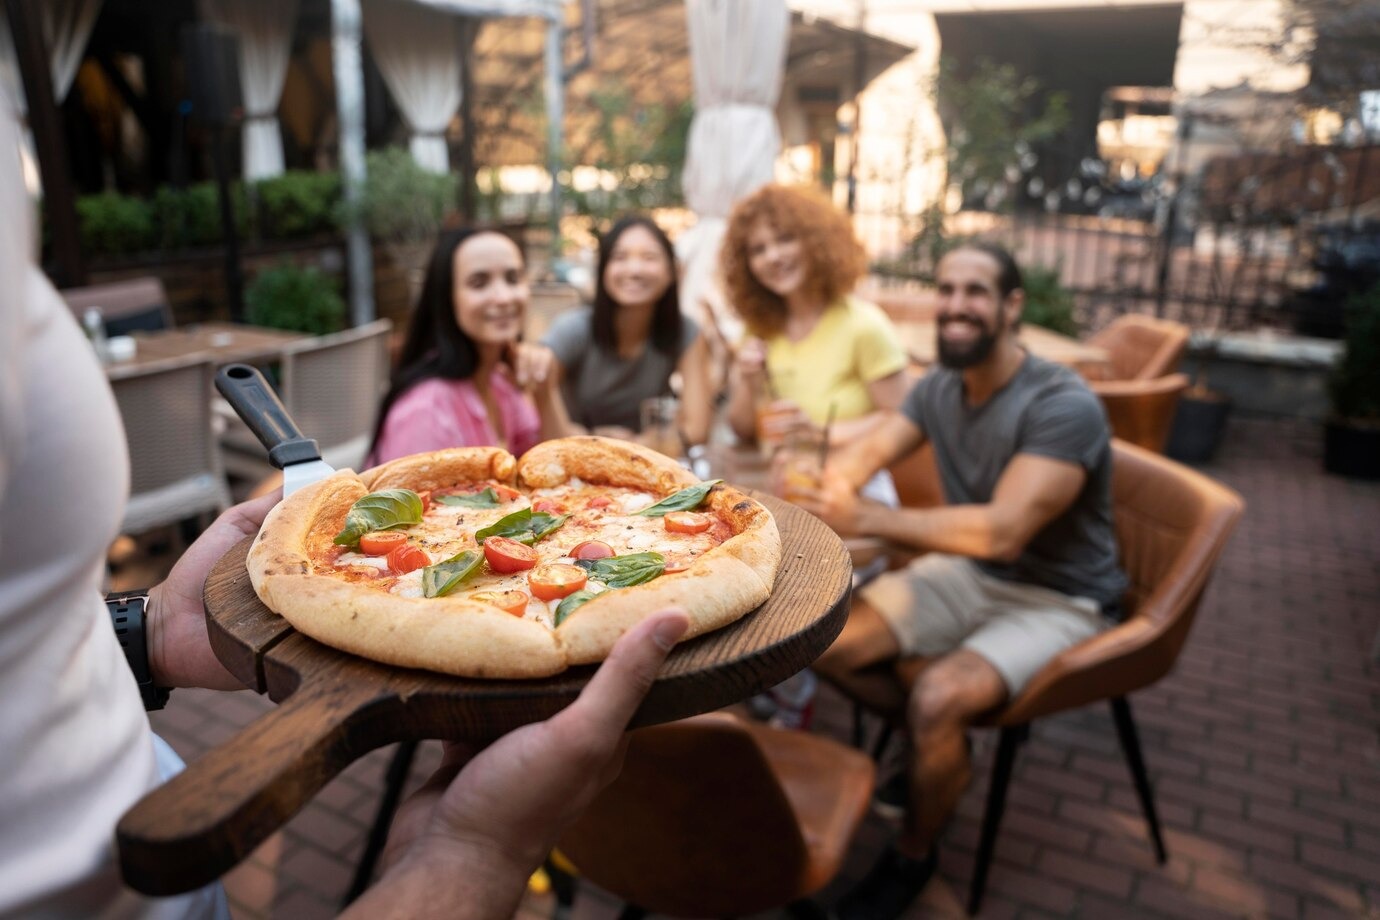 How to Make Your Pizza Restaurant Feel Authentically Italian